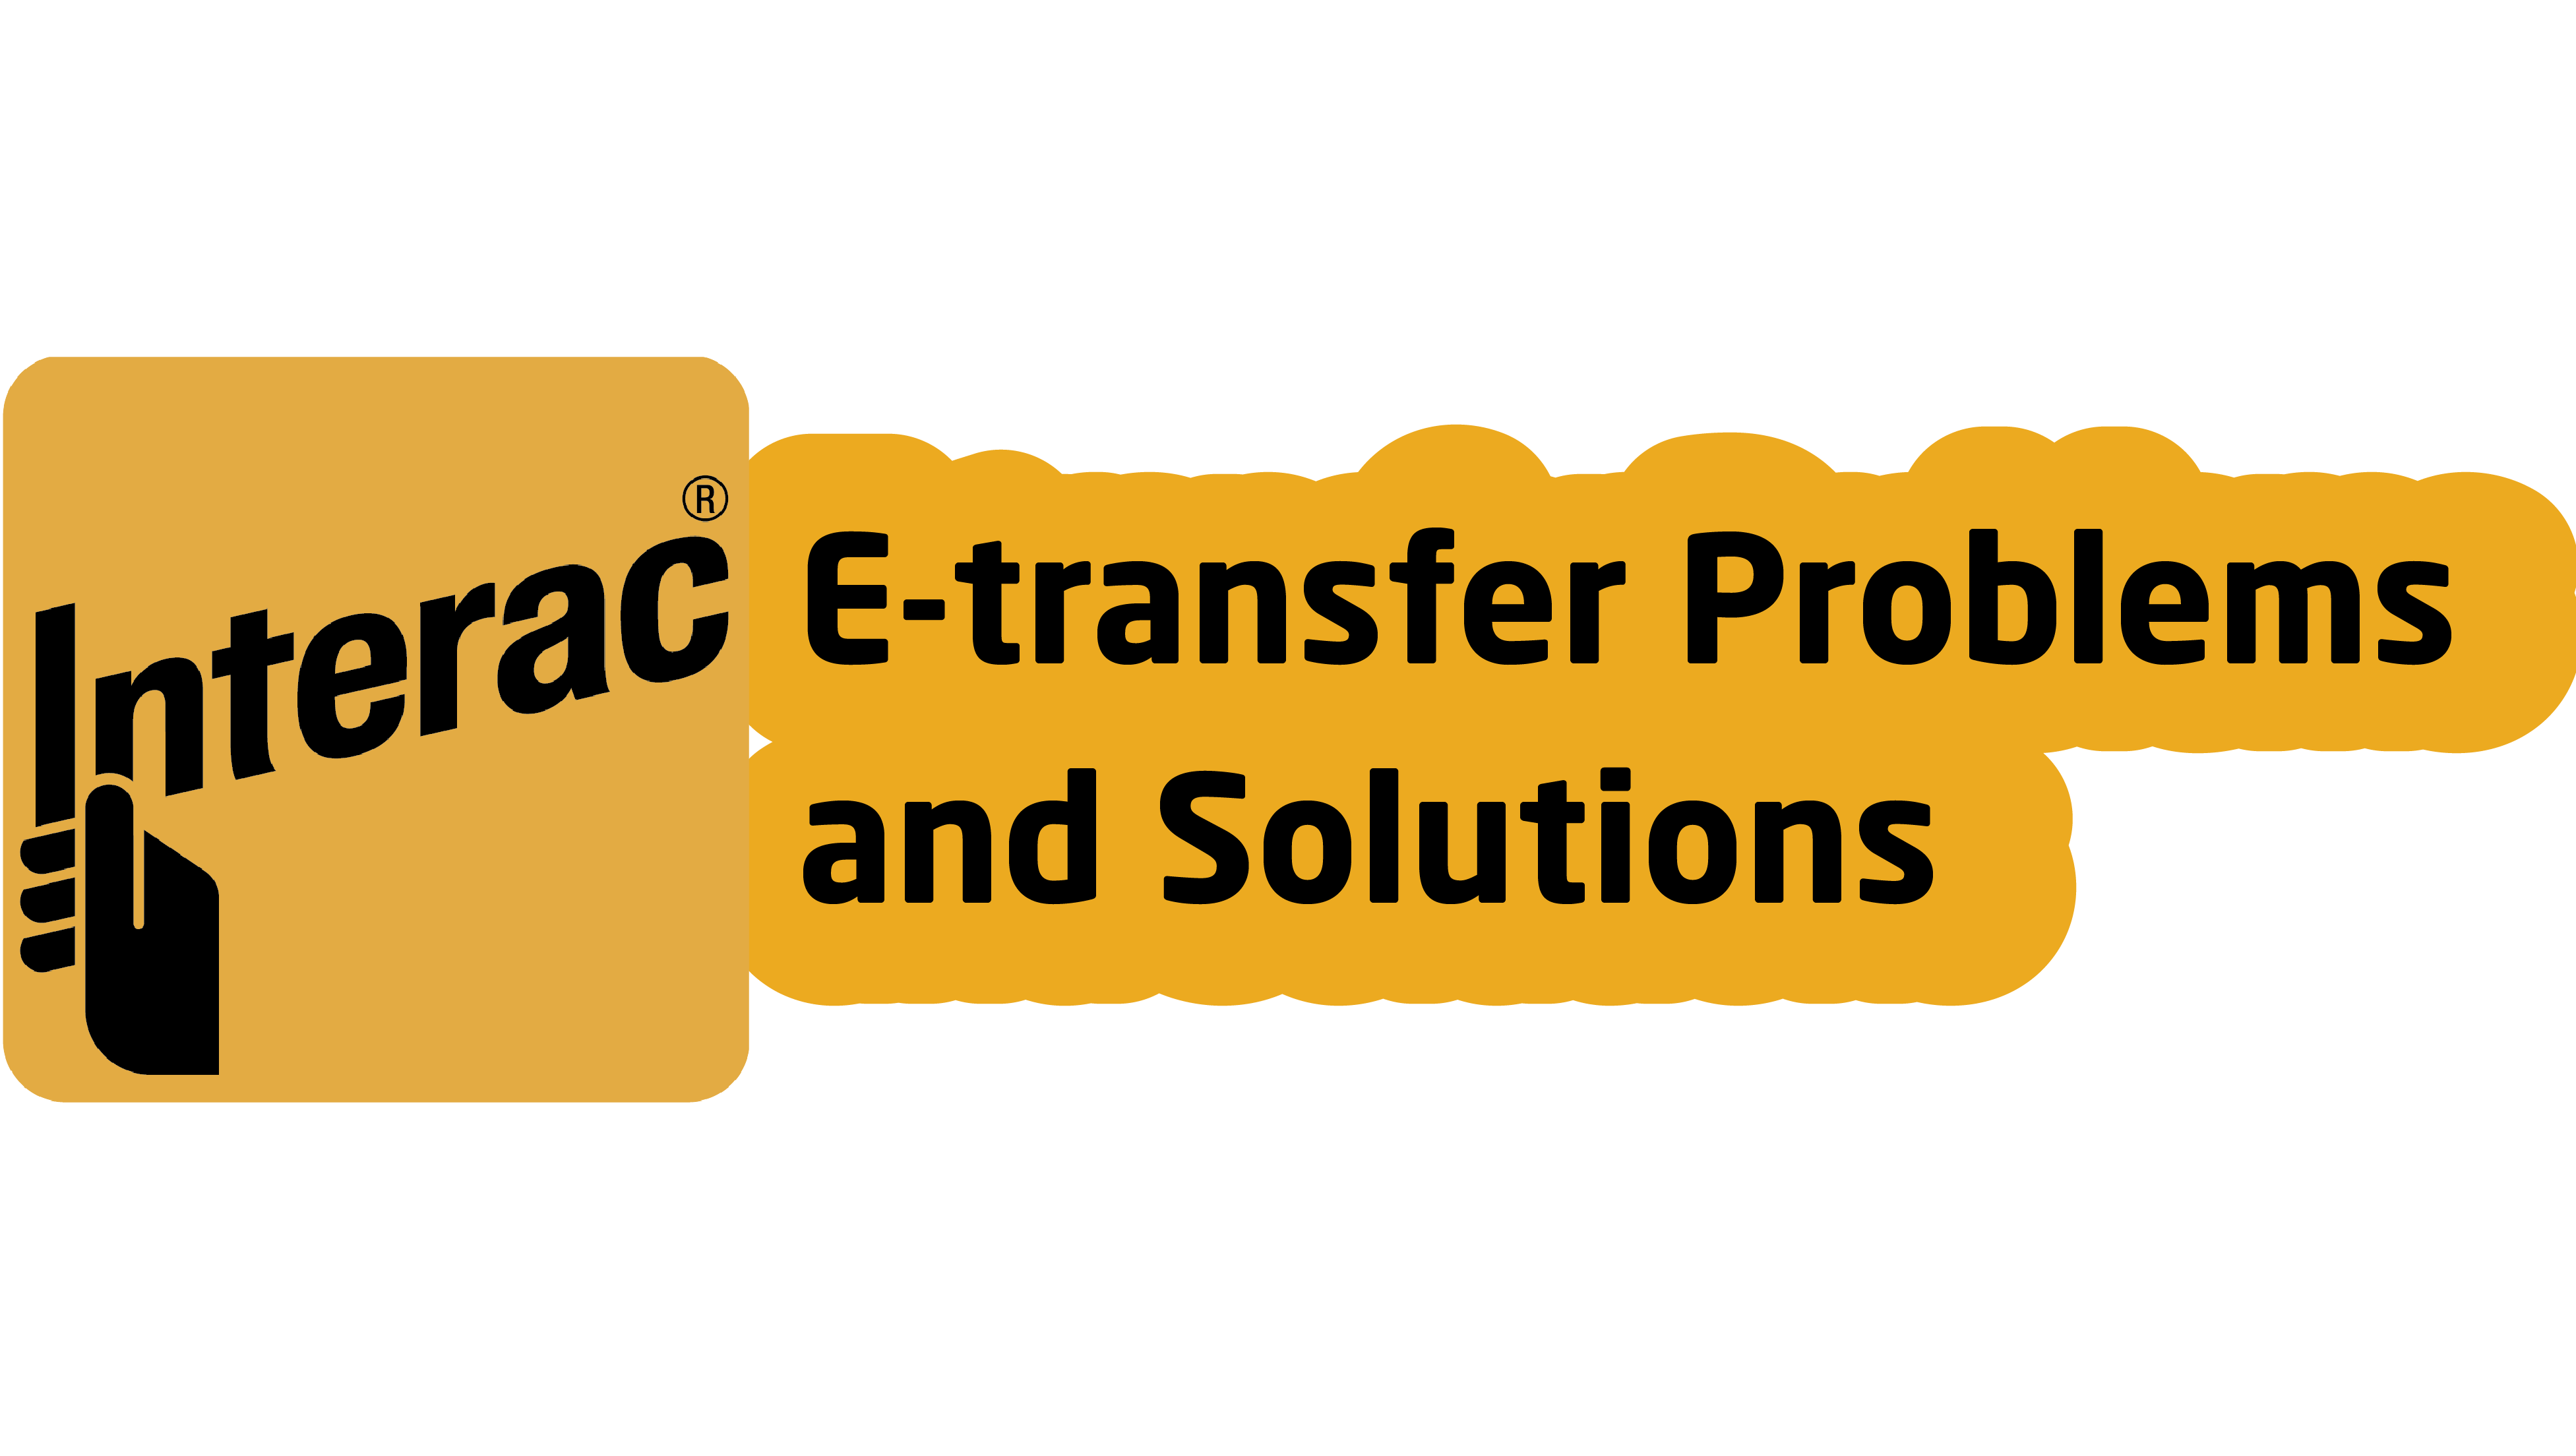 Issues with Interac e-Transfer canada ottawa solutions